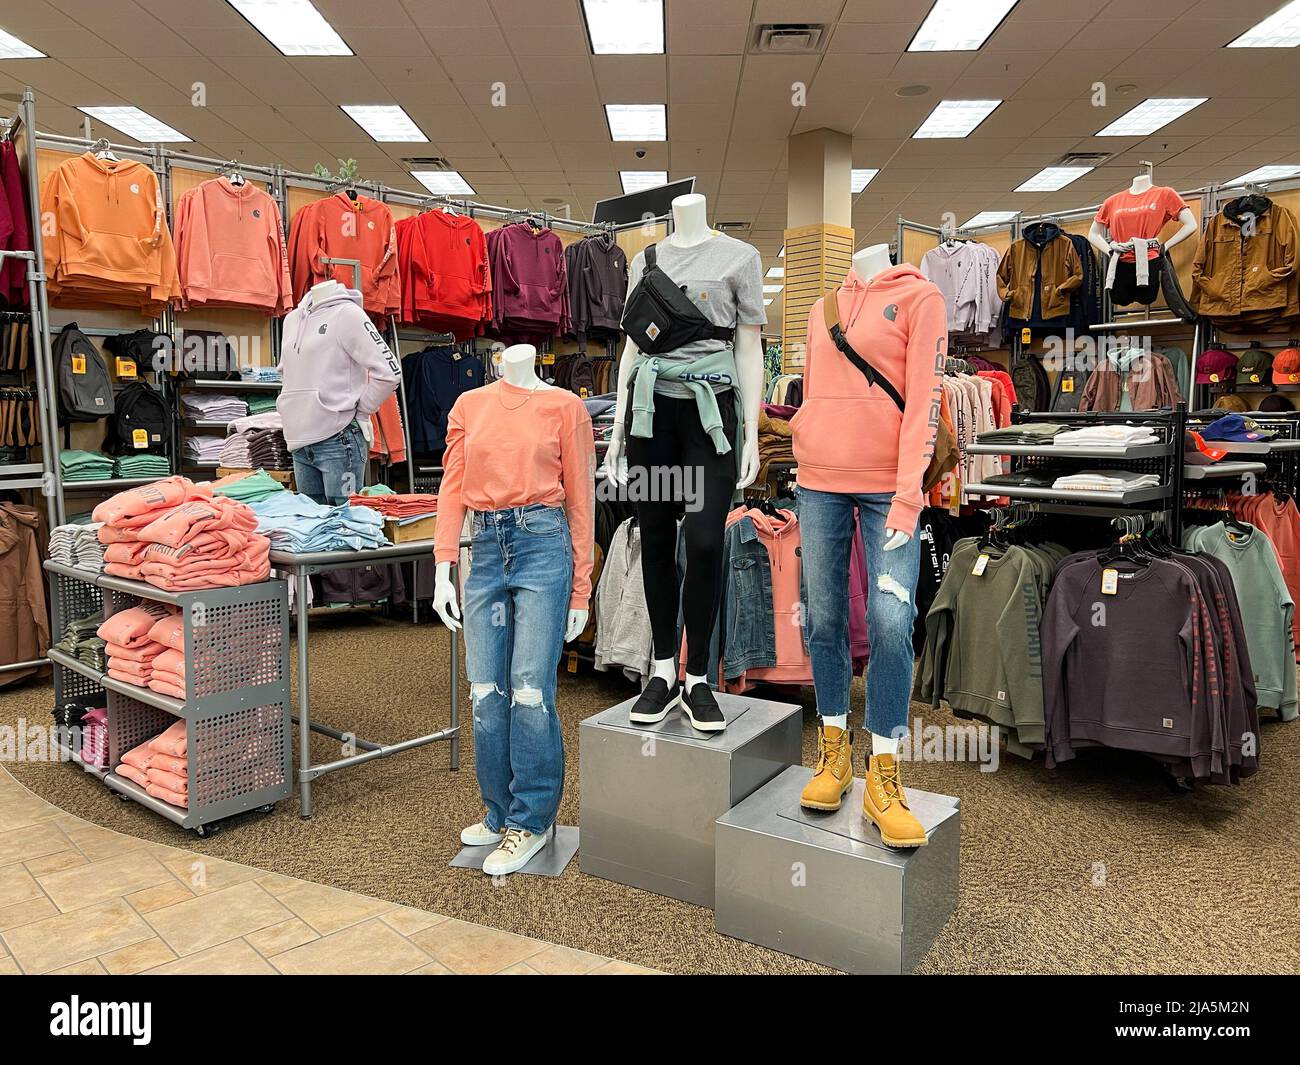 Springfield, IL USA - May 2, 2022: A display of women’s Carhartt clothing for sale at the Scheels Sporting Goods store in Springfield, Illinois. Stock Photo